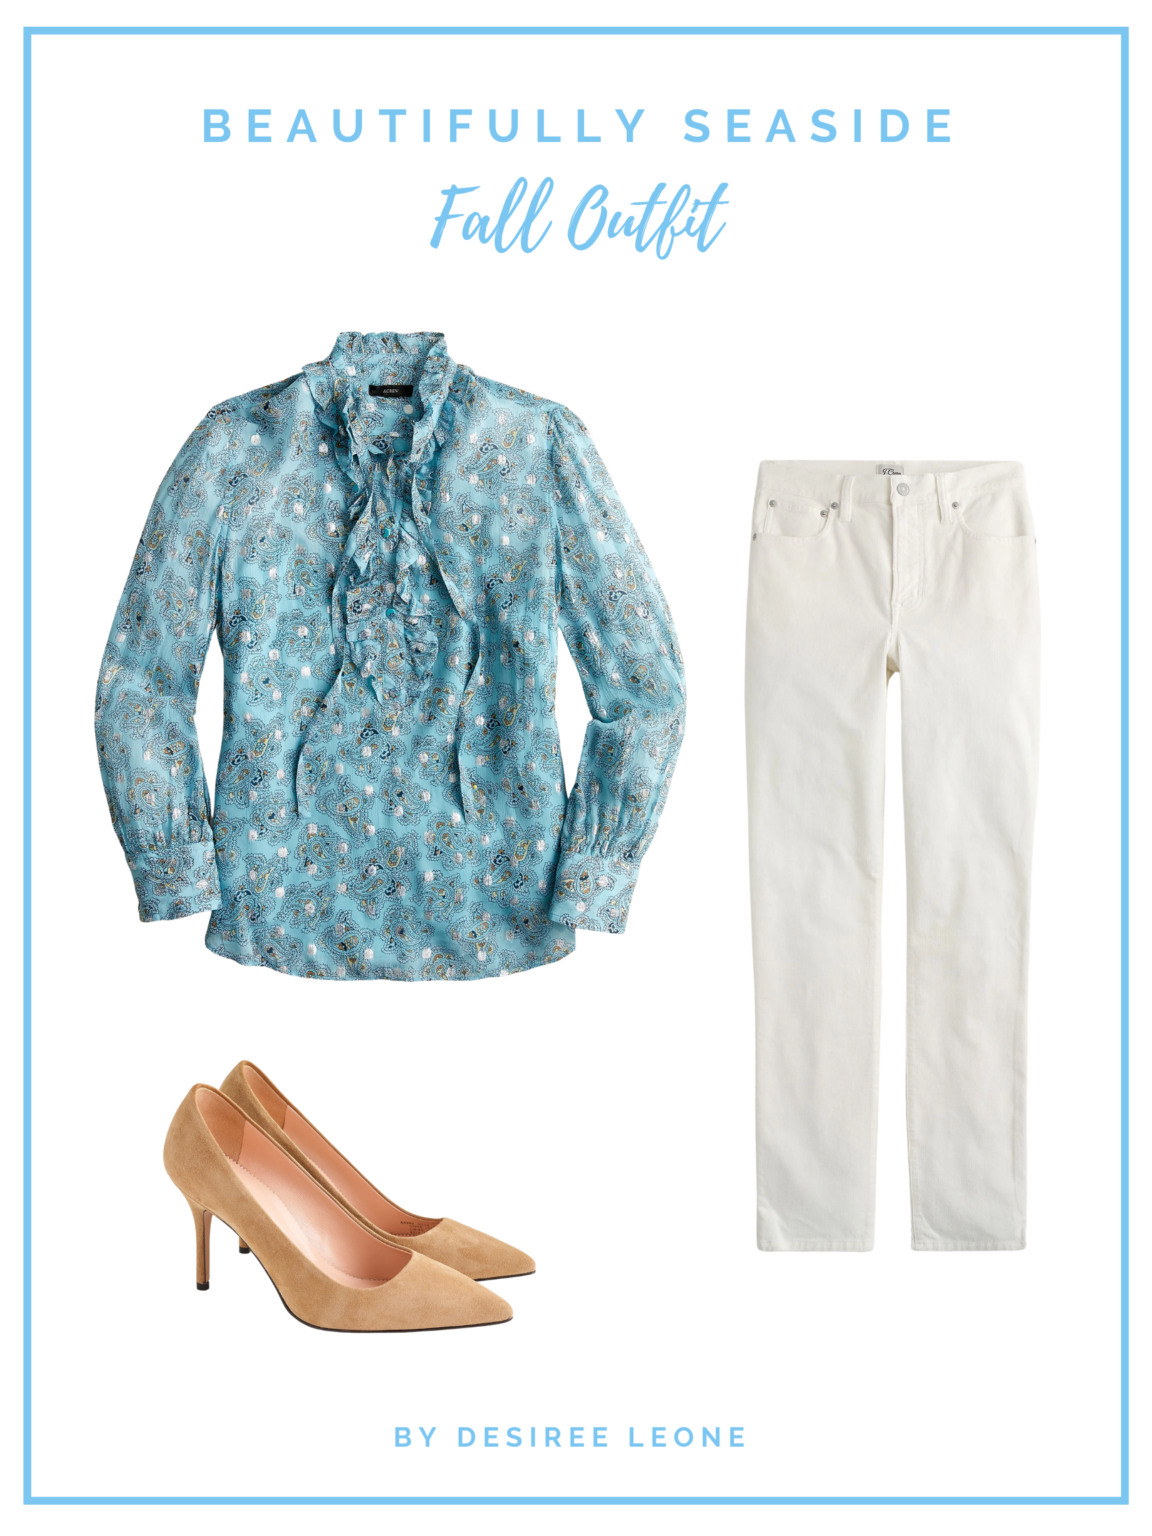 6 COZY J.CREW OUTFIT IDEAS FOR FALL - Beautifully Seaside